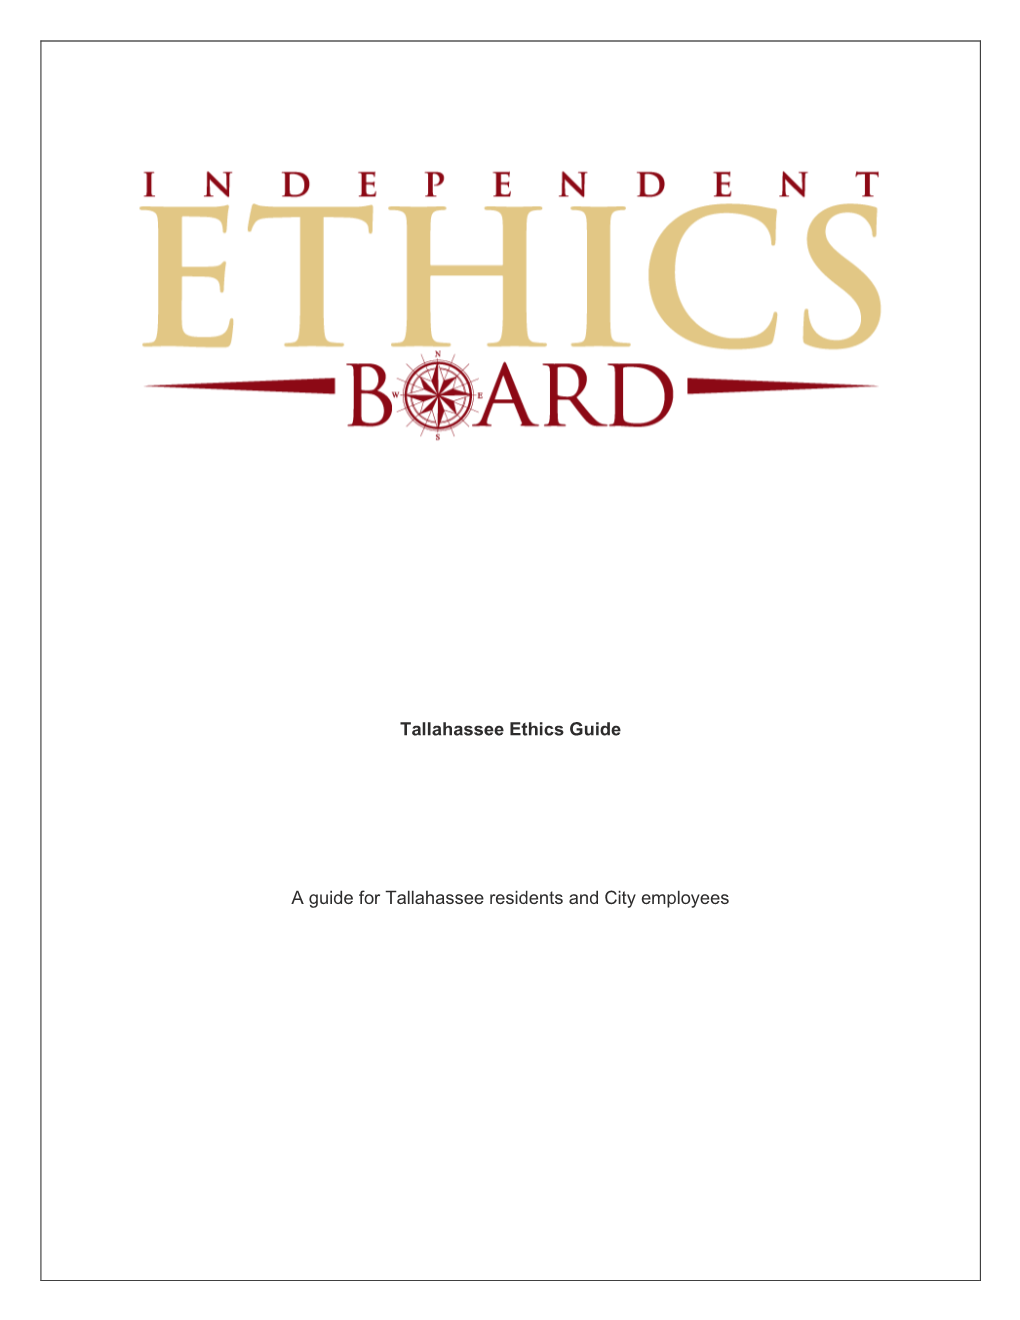 Tallahassee Ethics Guide